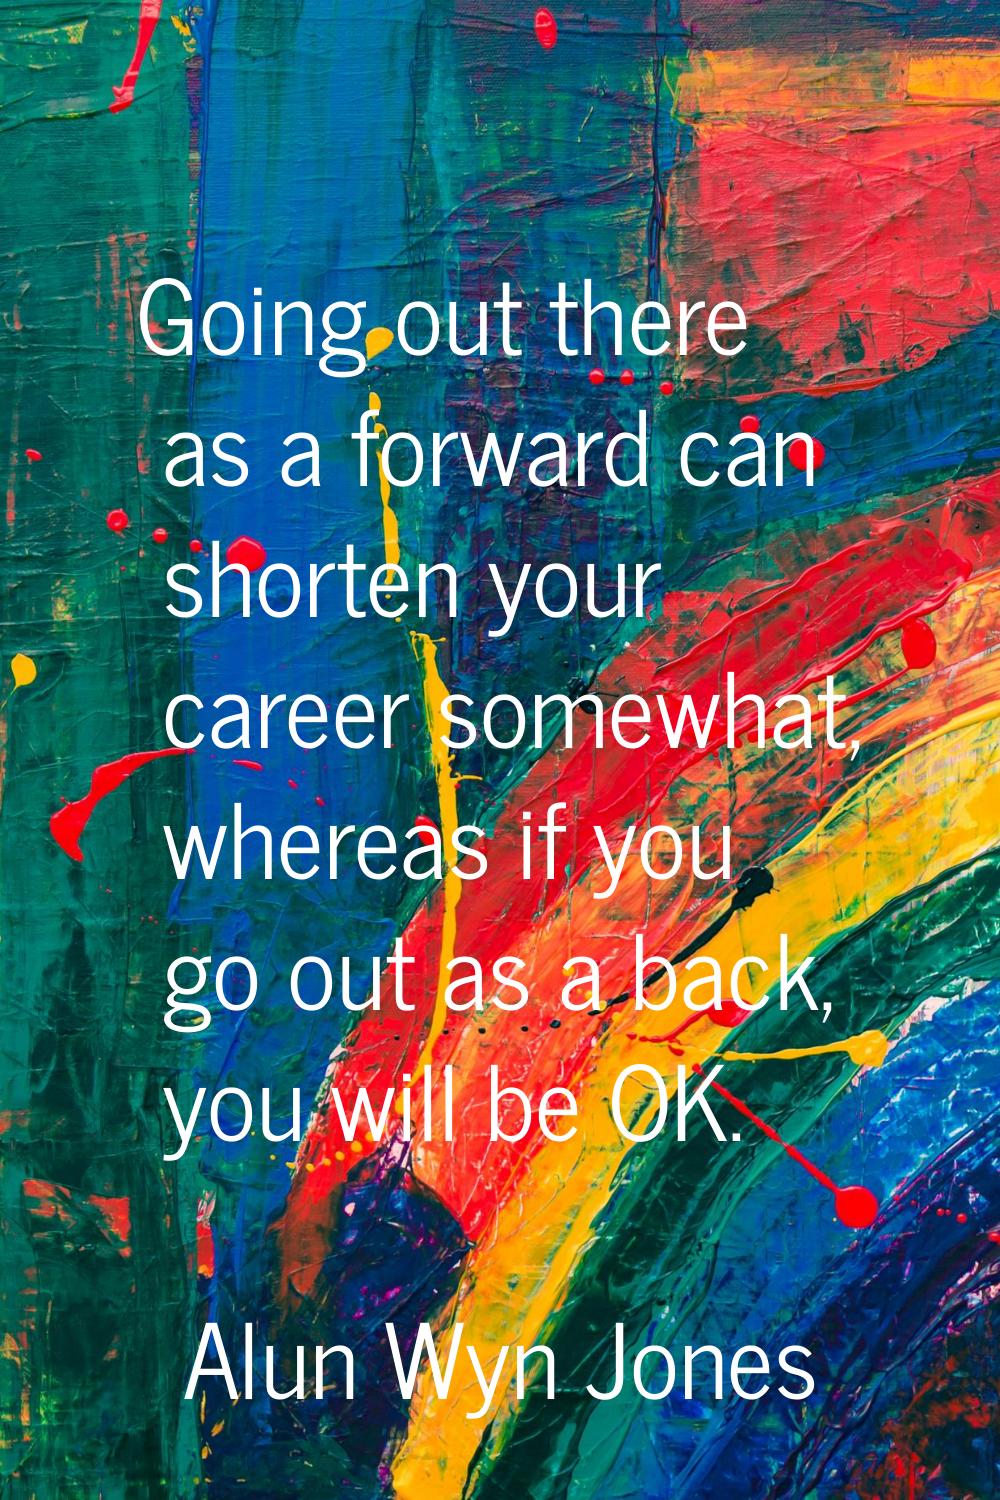 Going out there as a forward can shorten your career somewhat, whereas if you go out as a back, you